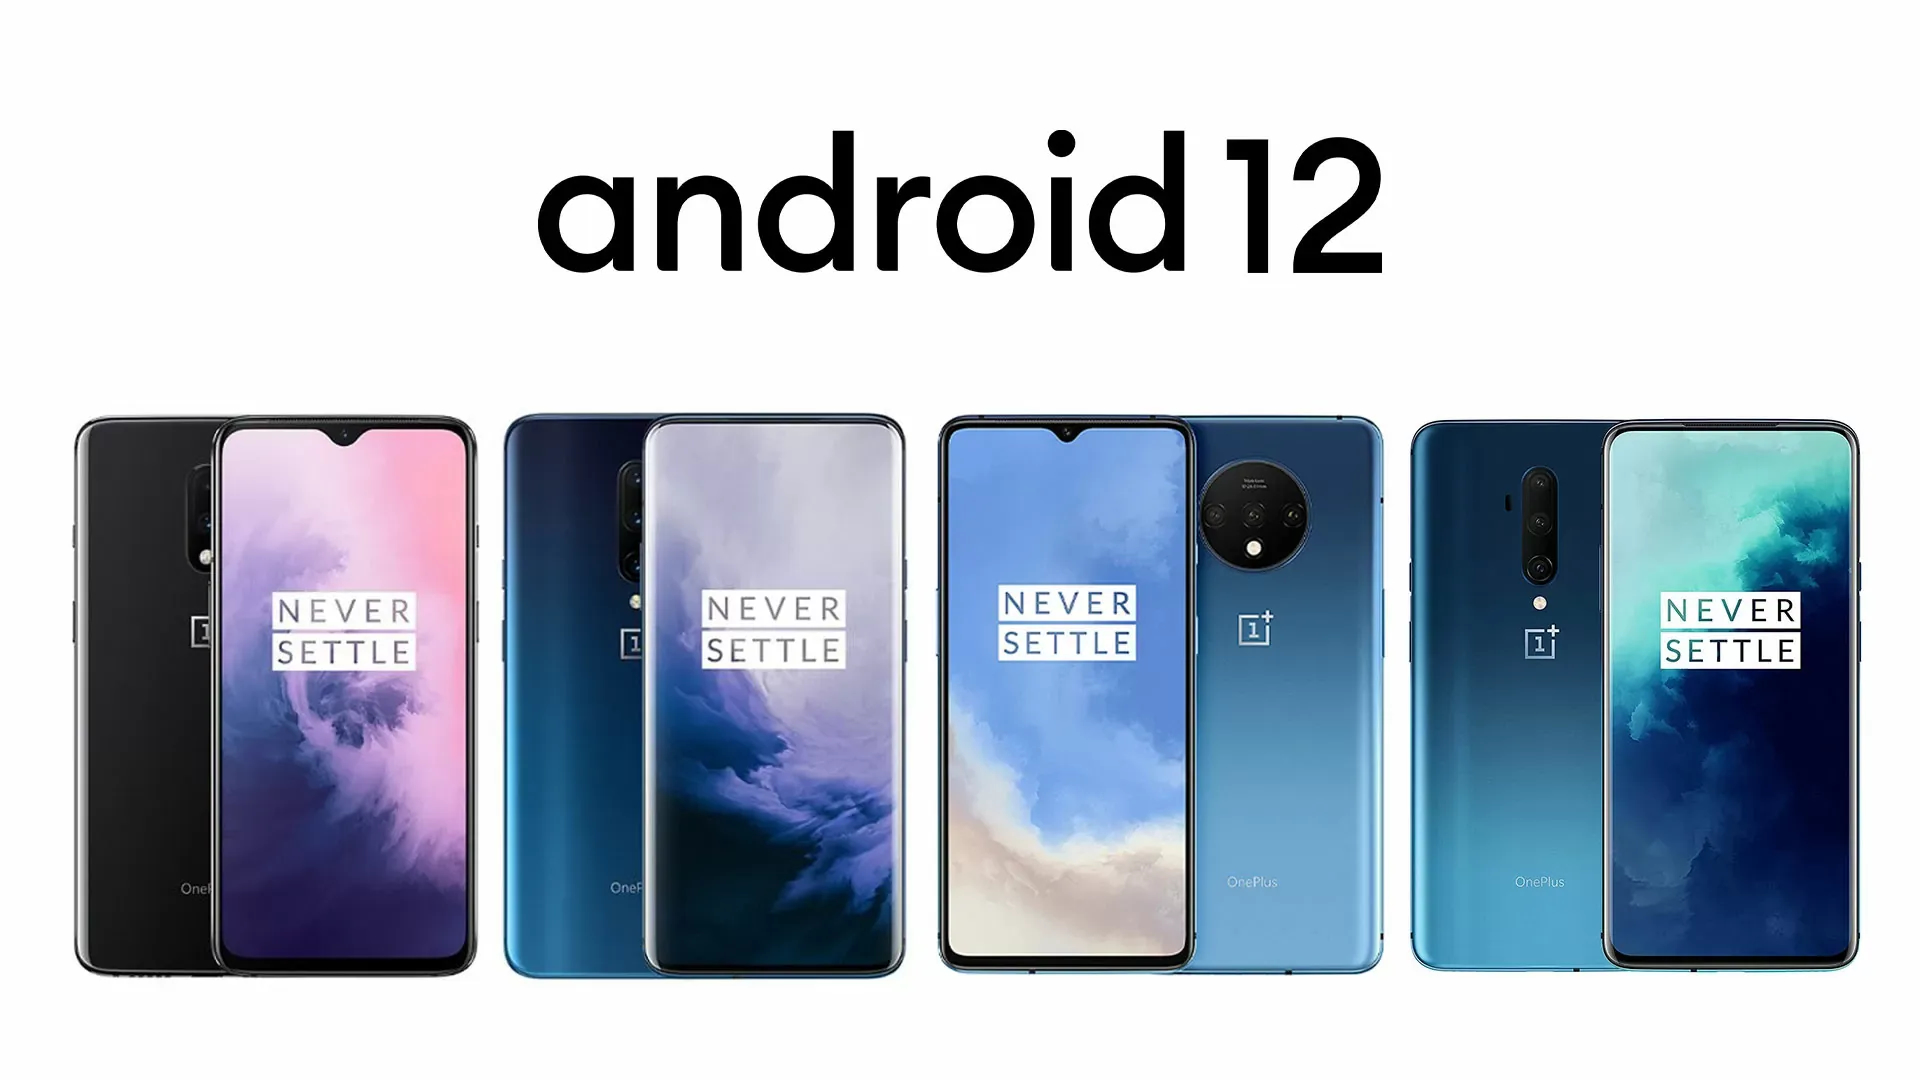 OxygenOS 12 based on Android 12 now available for OnePlus 7 Series